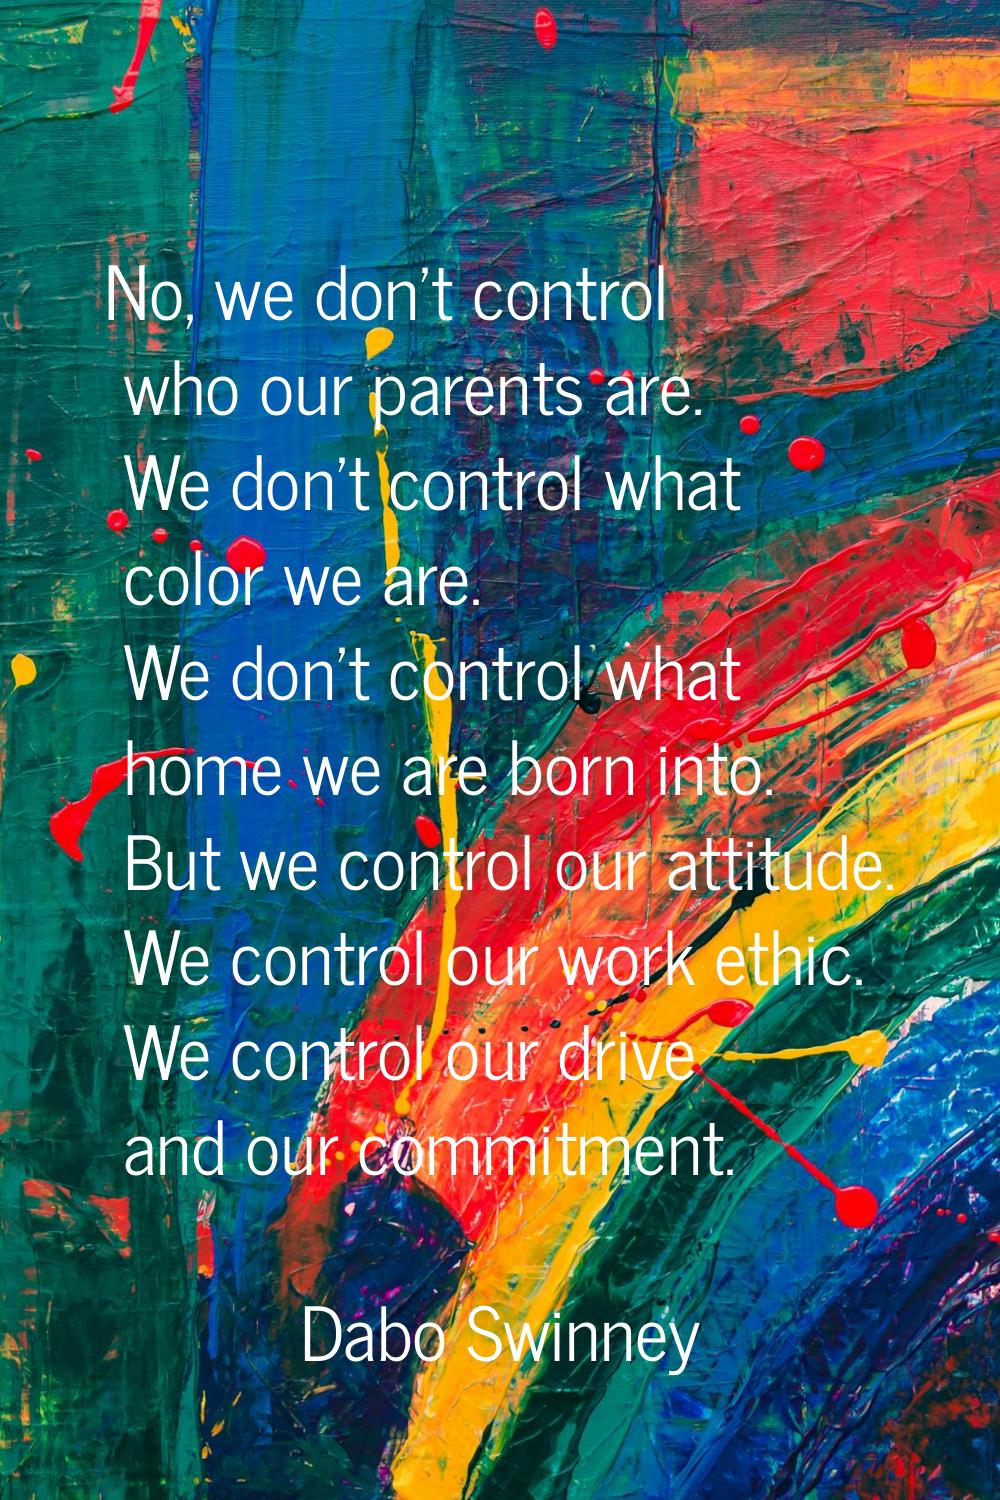 No, we don't control who our parents are. We don't control what color we are. We don't control what